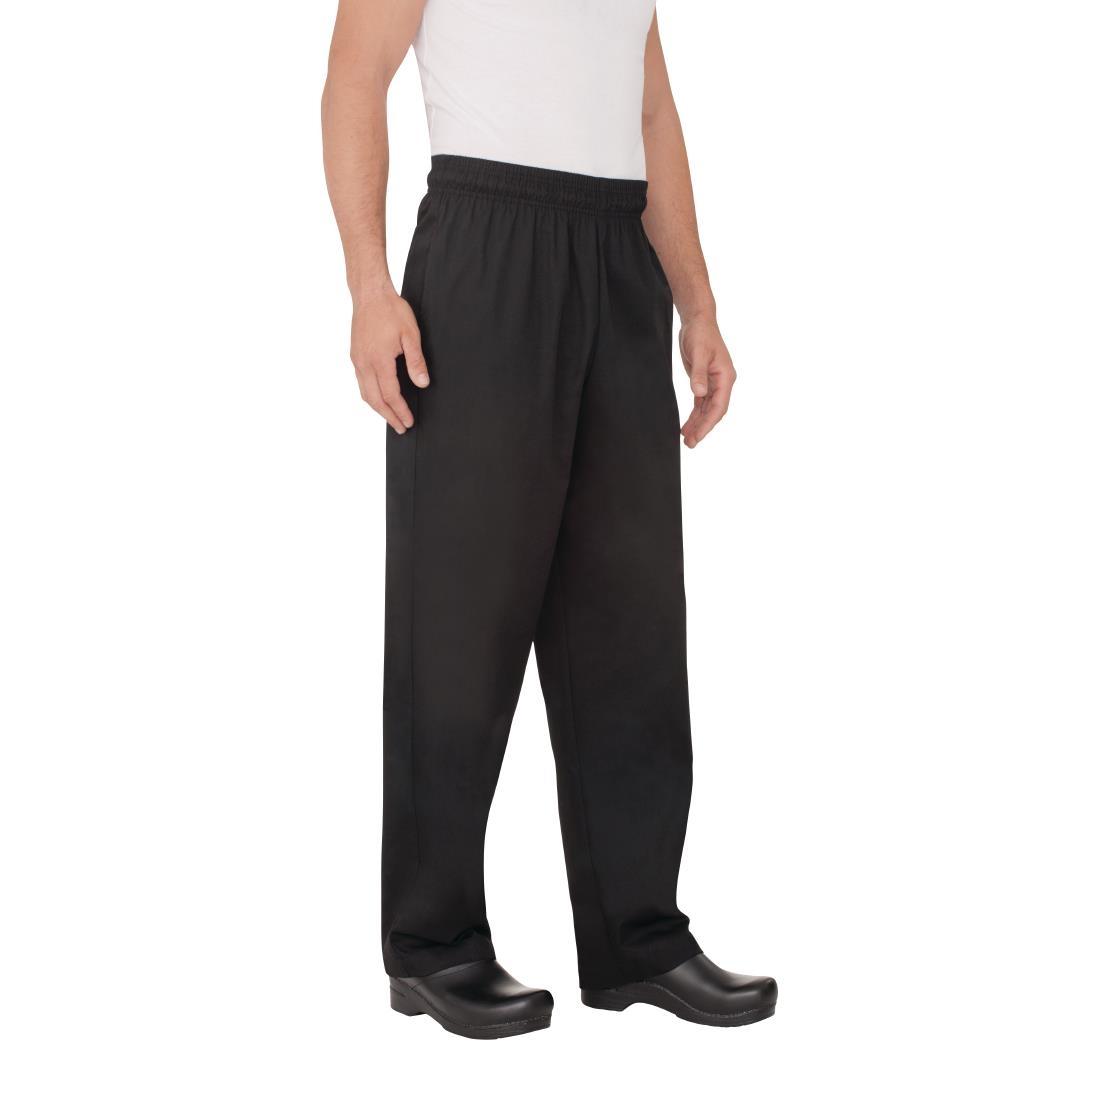 Chef Works Essential Baggy Trousers Black 7XL - A029-7XL  - 4